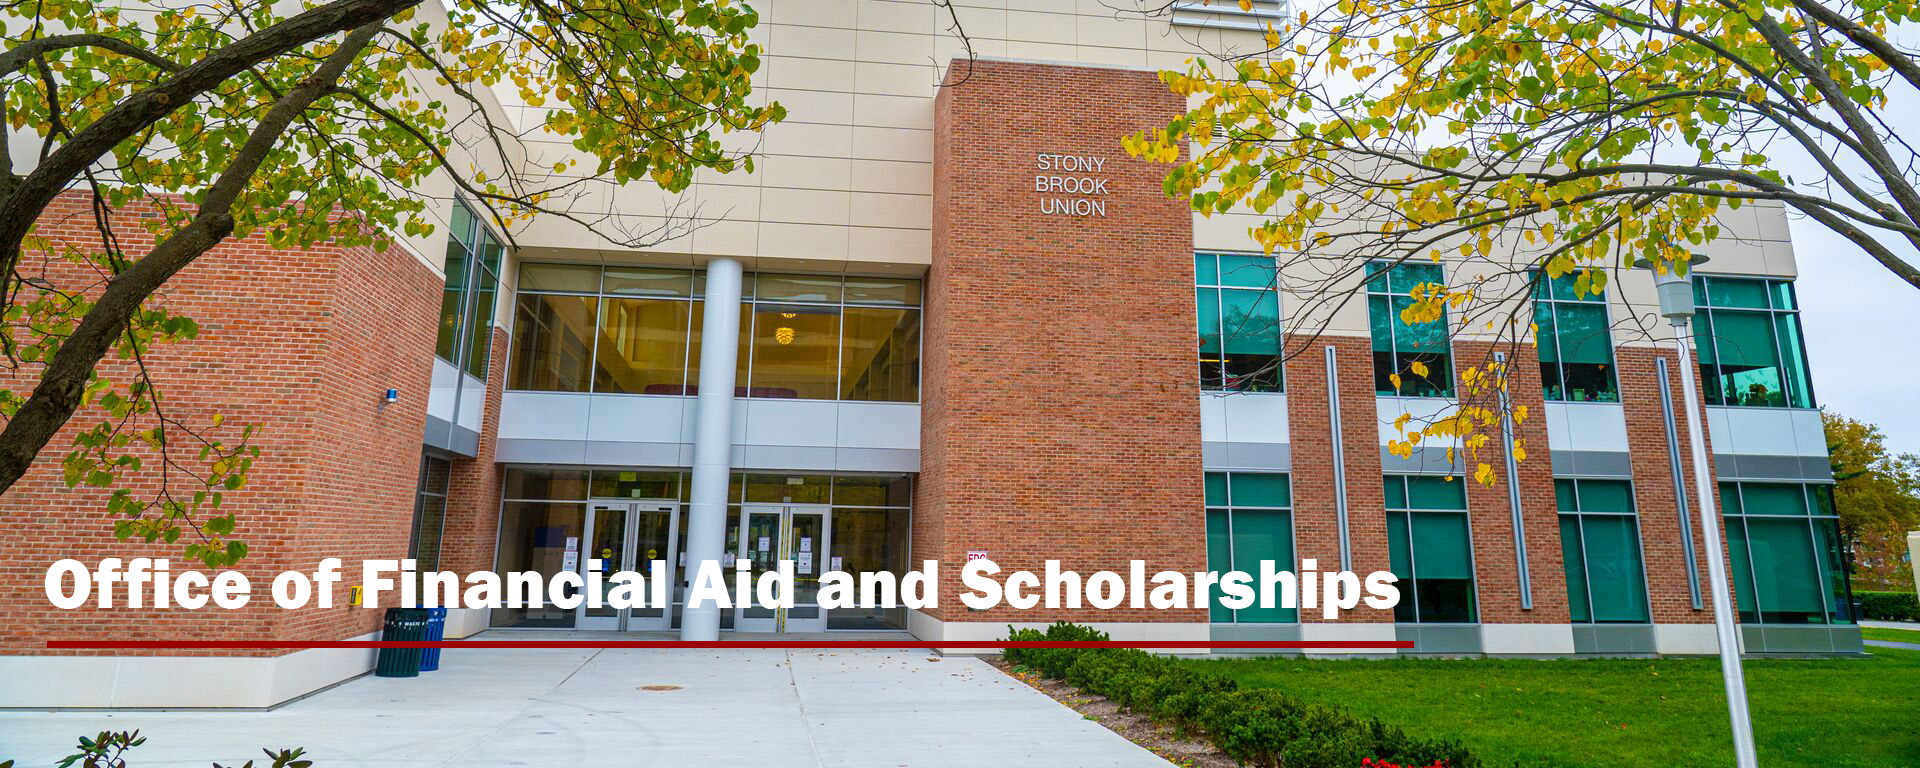 Financial Aid and Scholarships Header Image